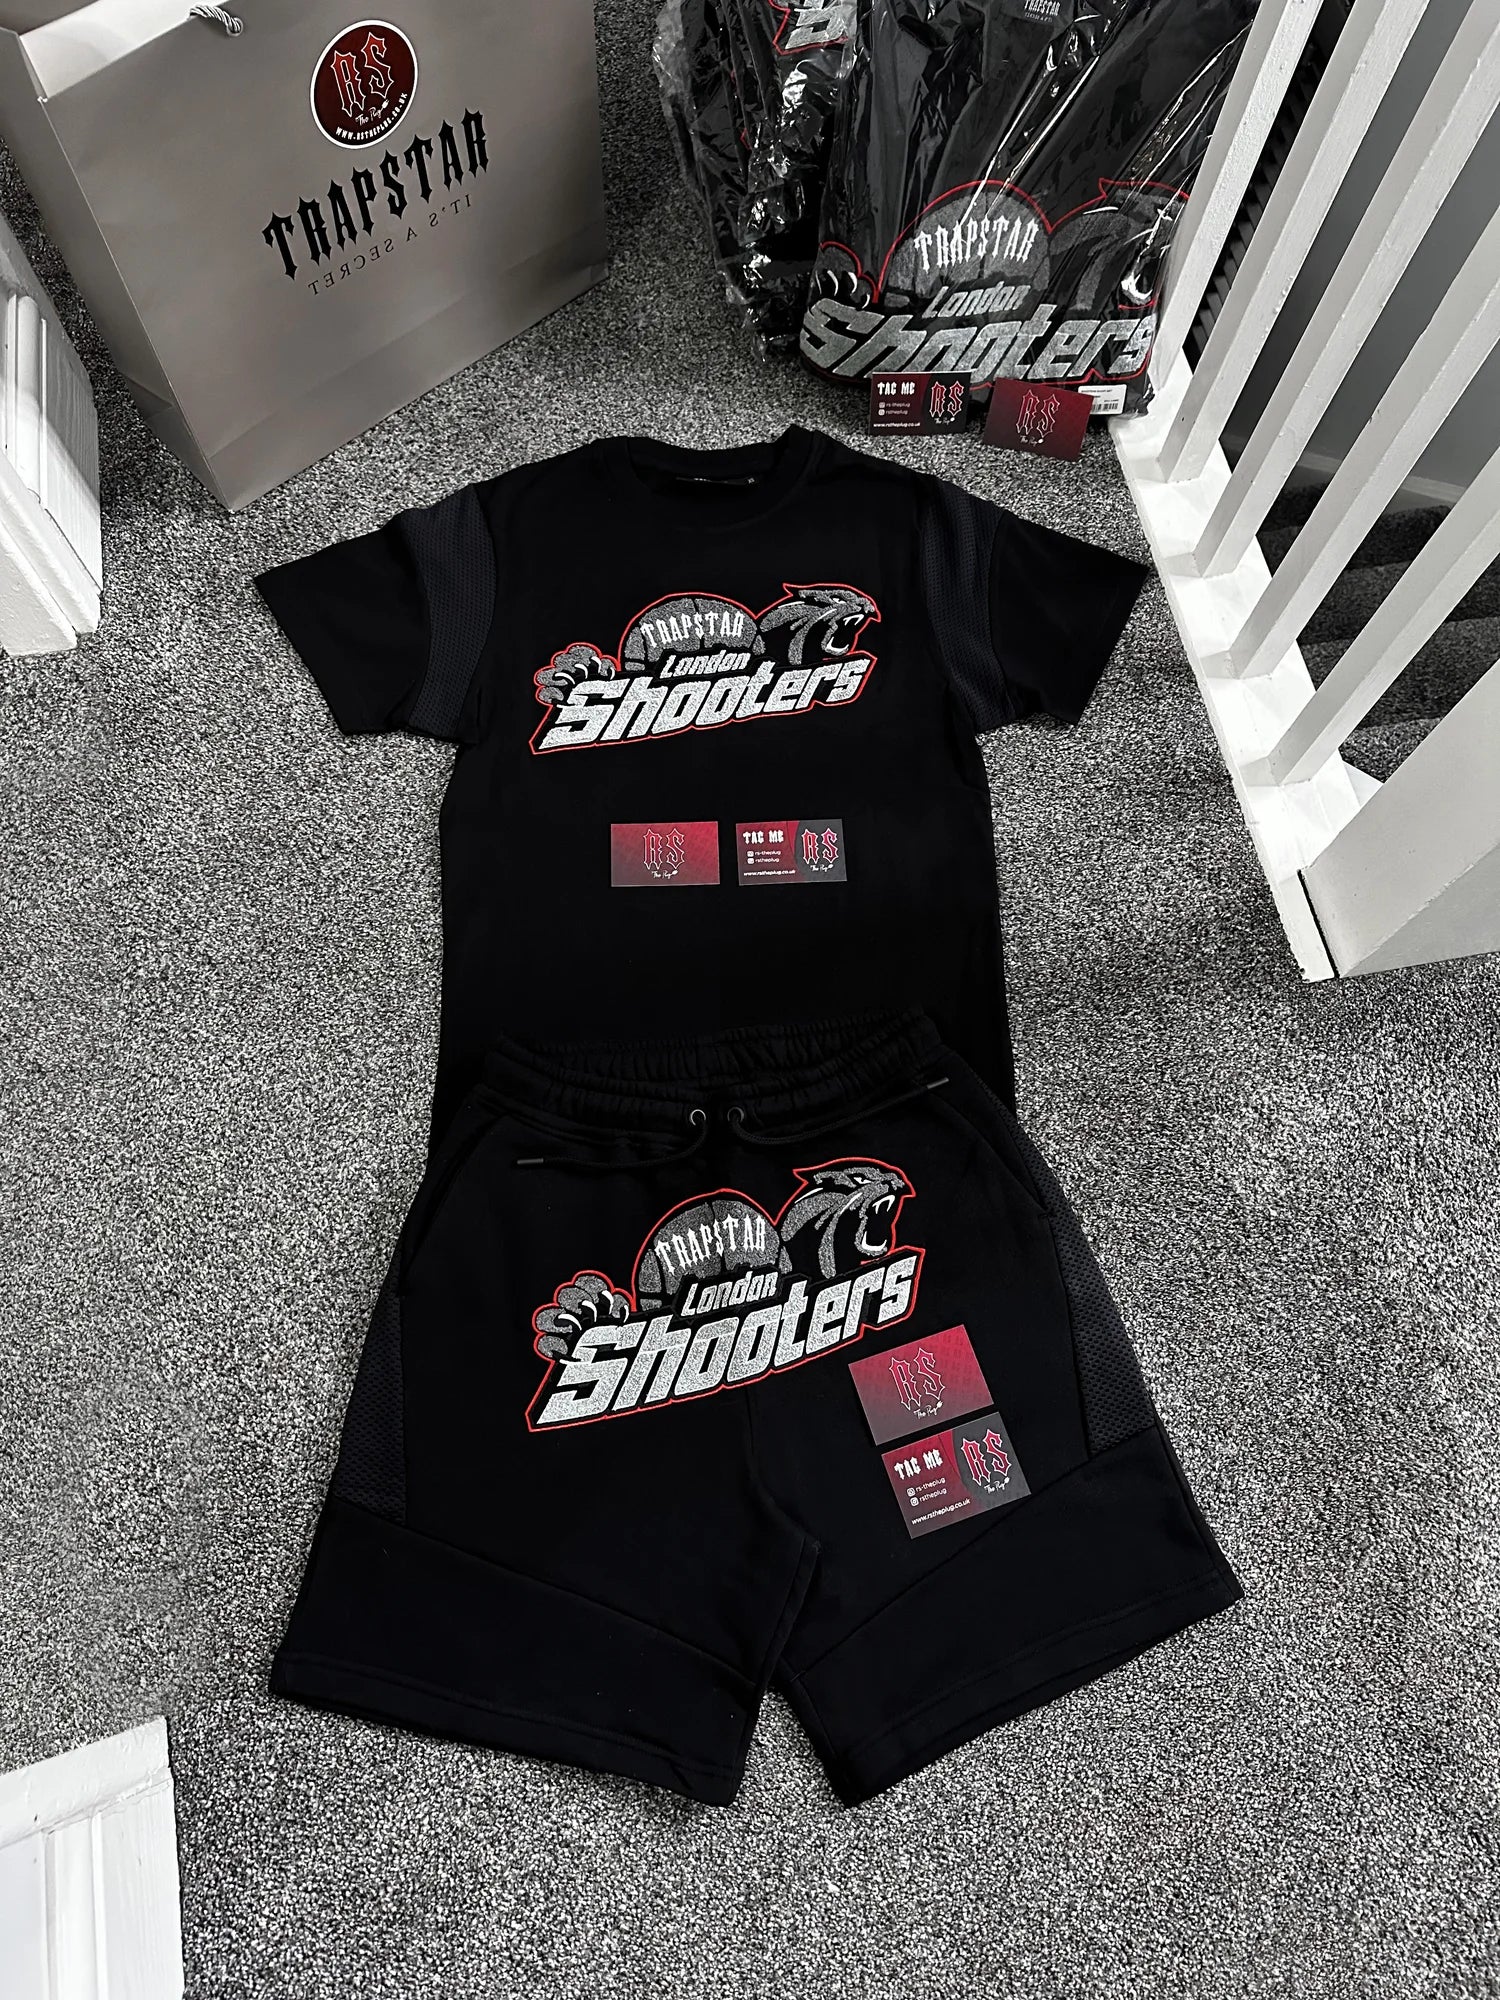 Trapstar Shooters Short Set Black/Red